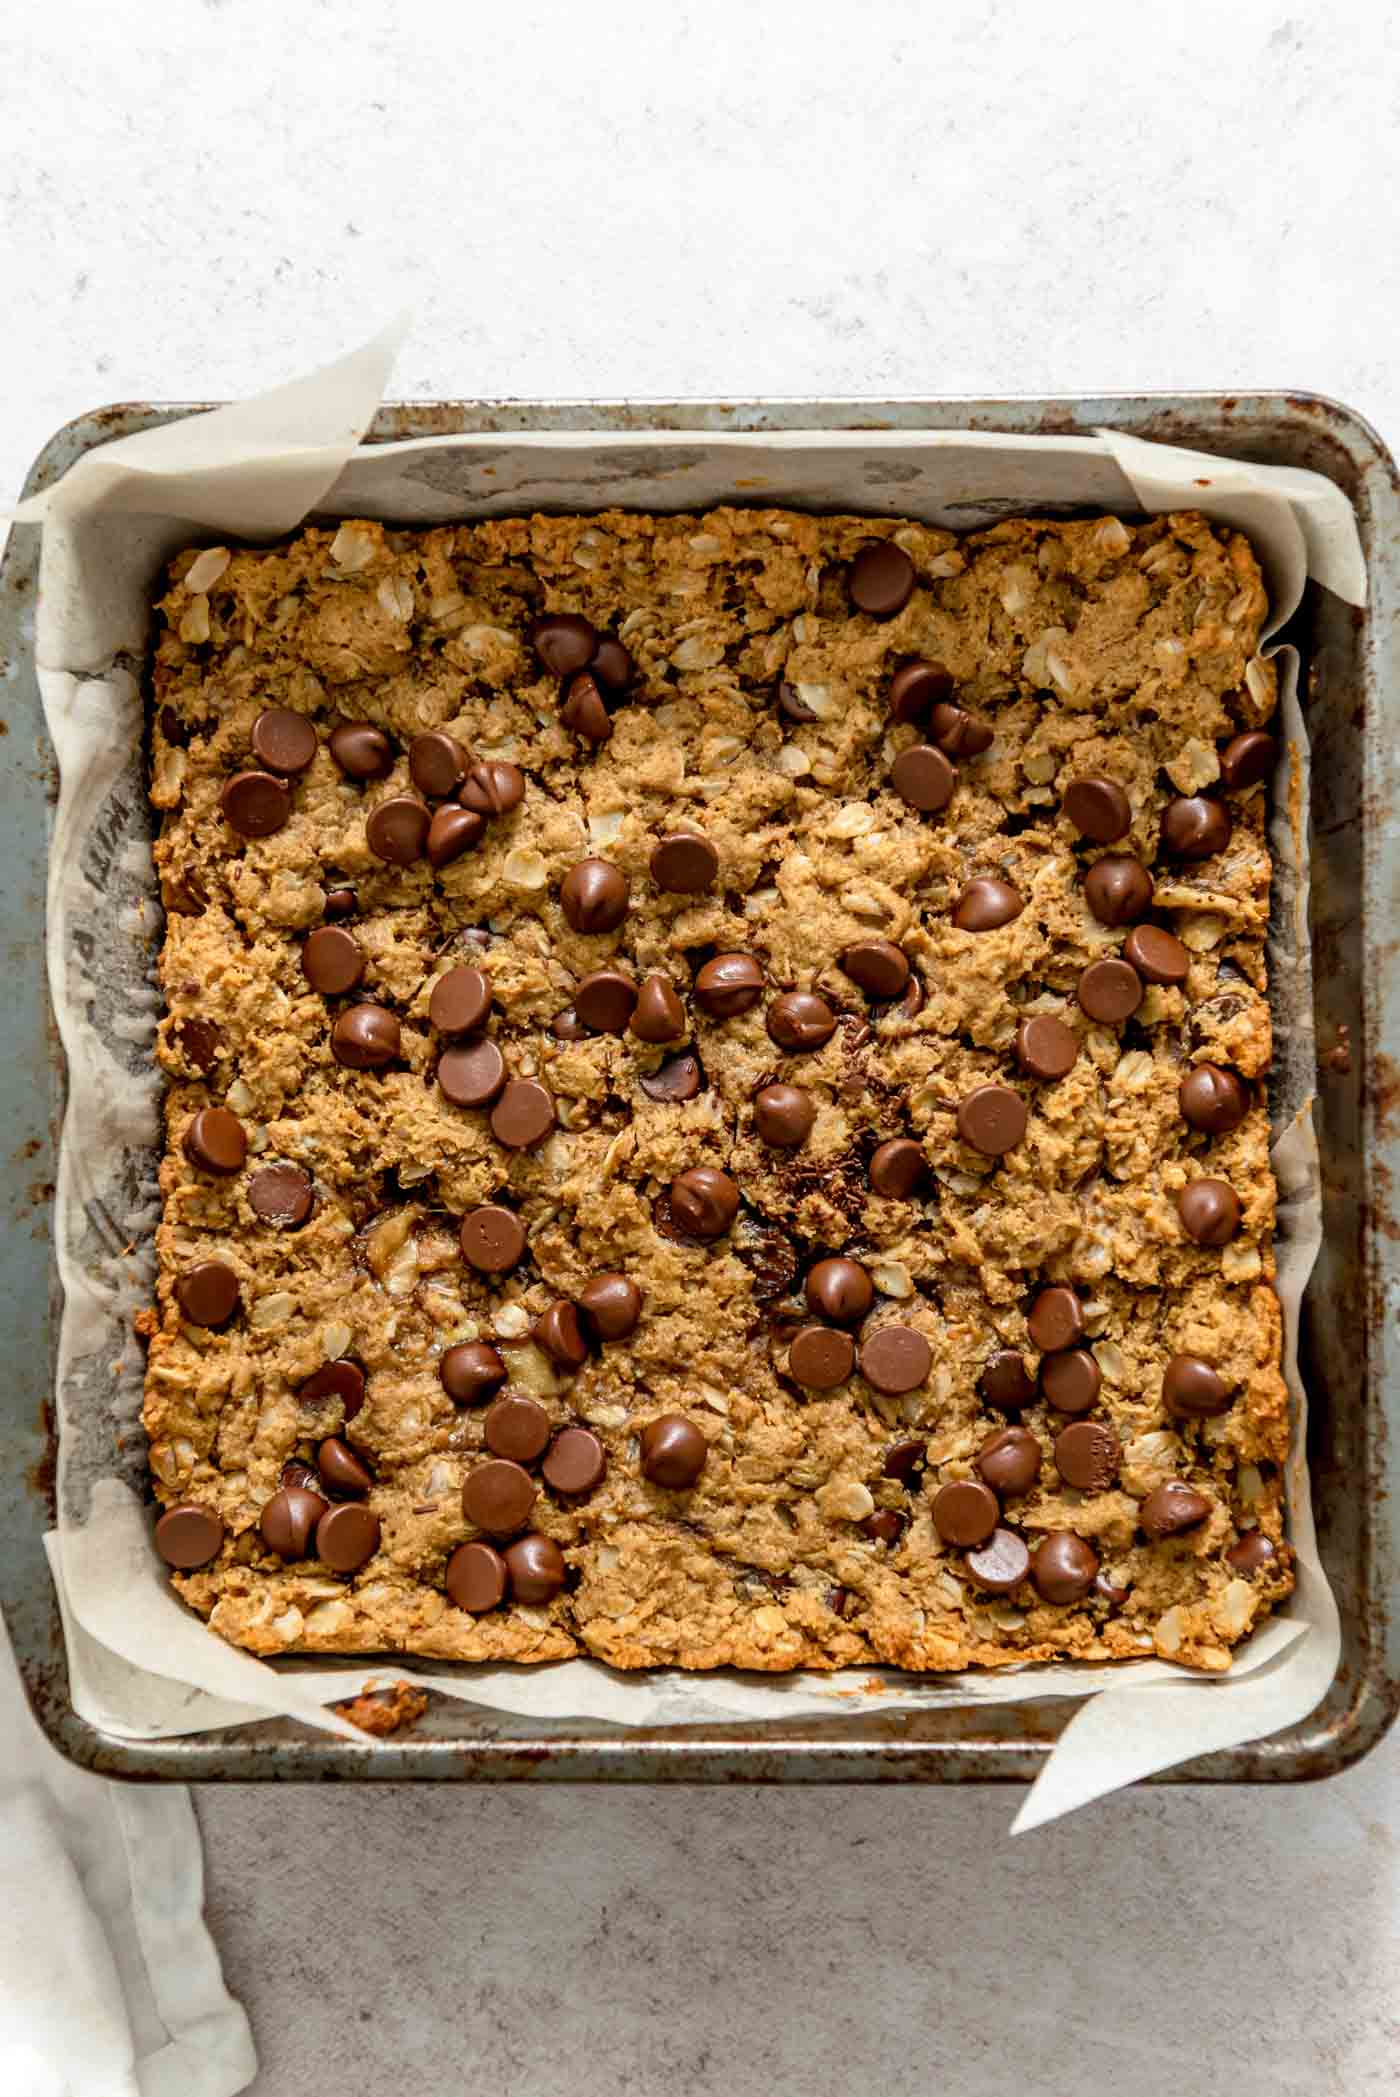 Overhead view into a pan of baked oatmeal chocolate chip cookie bars.